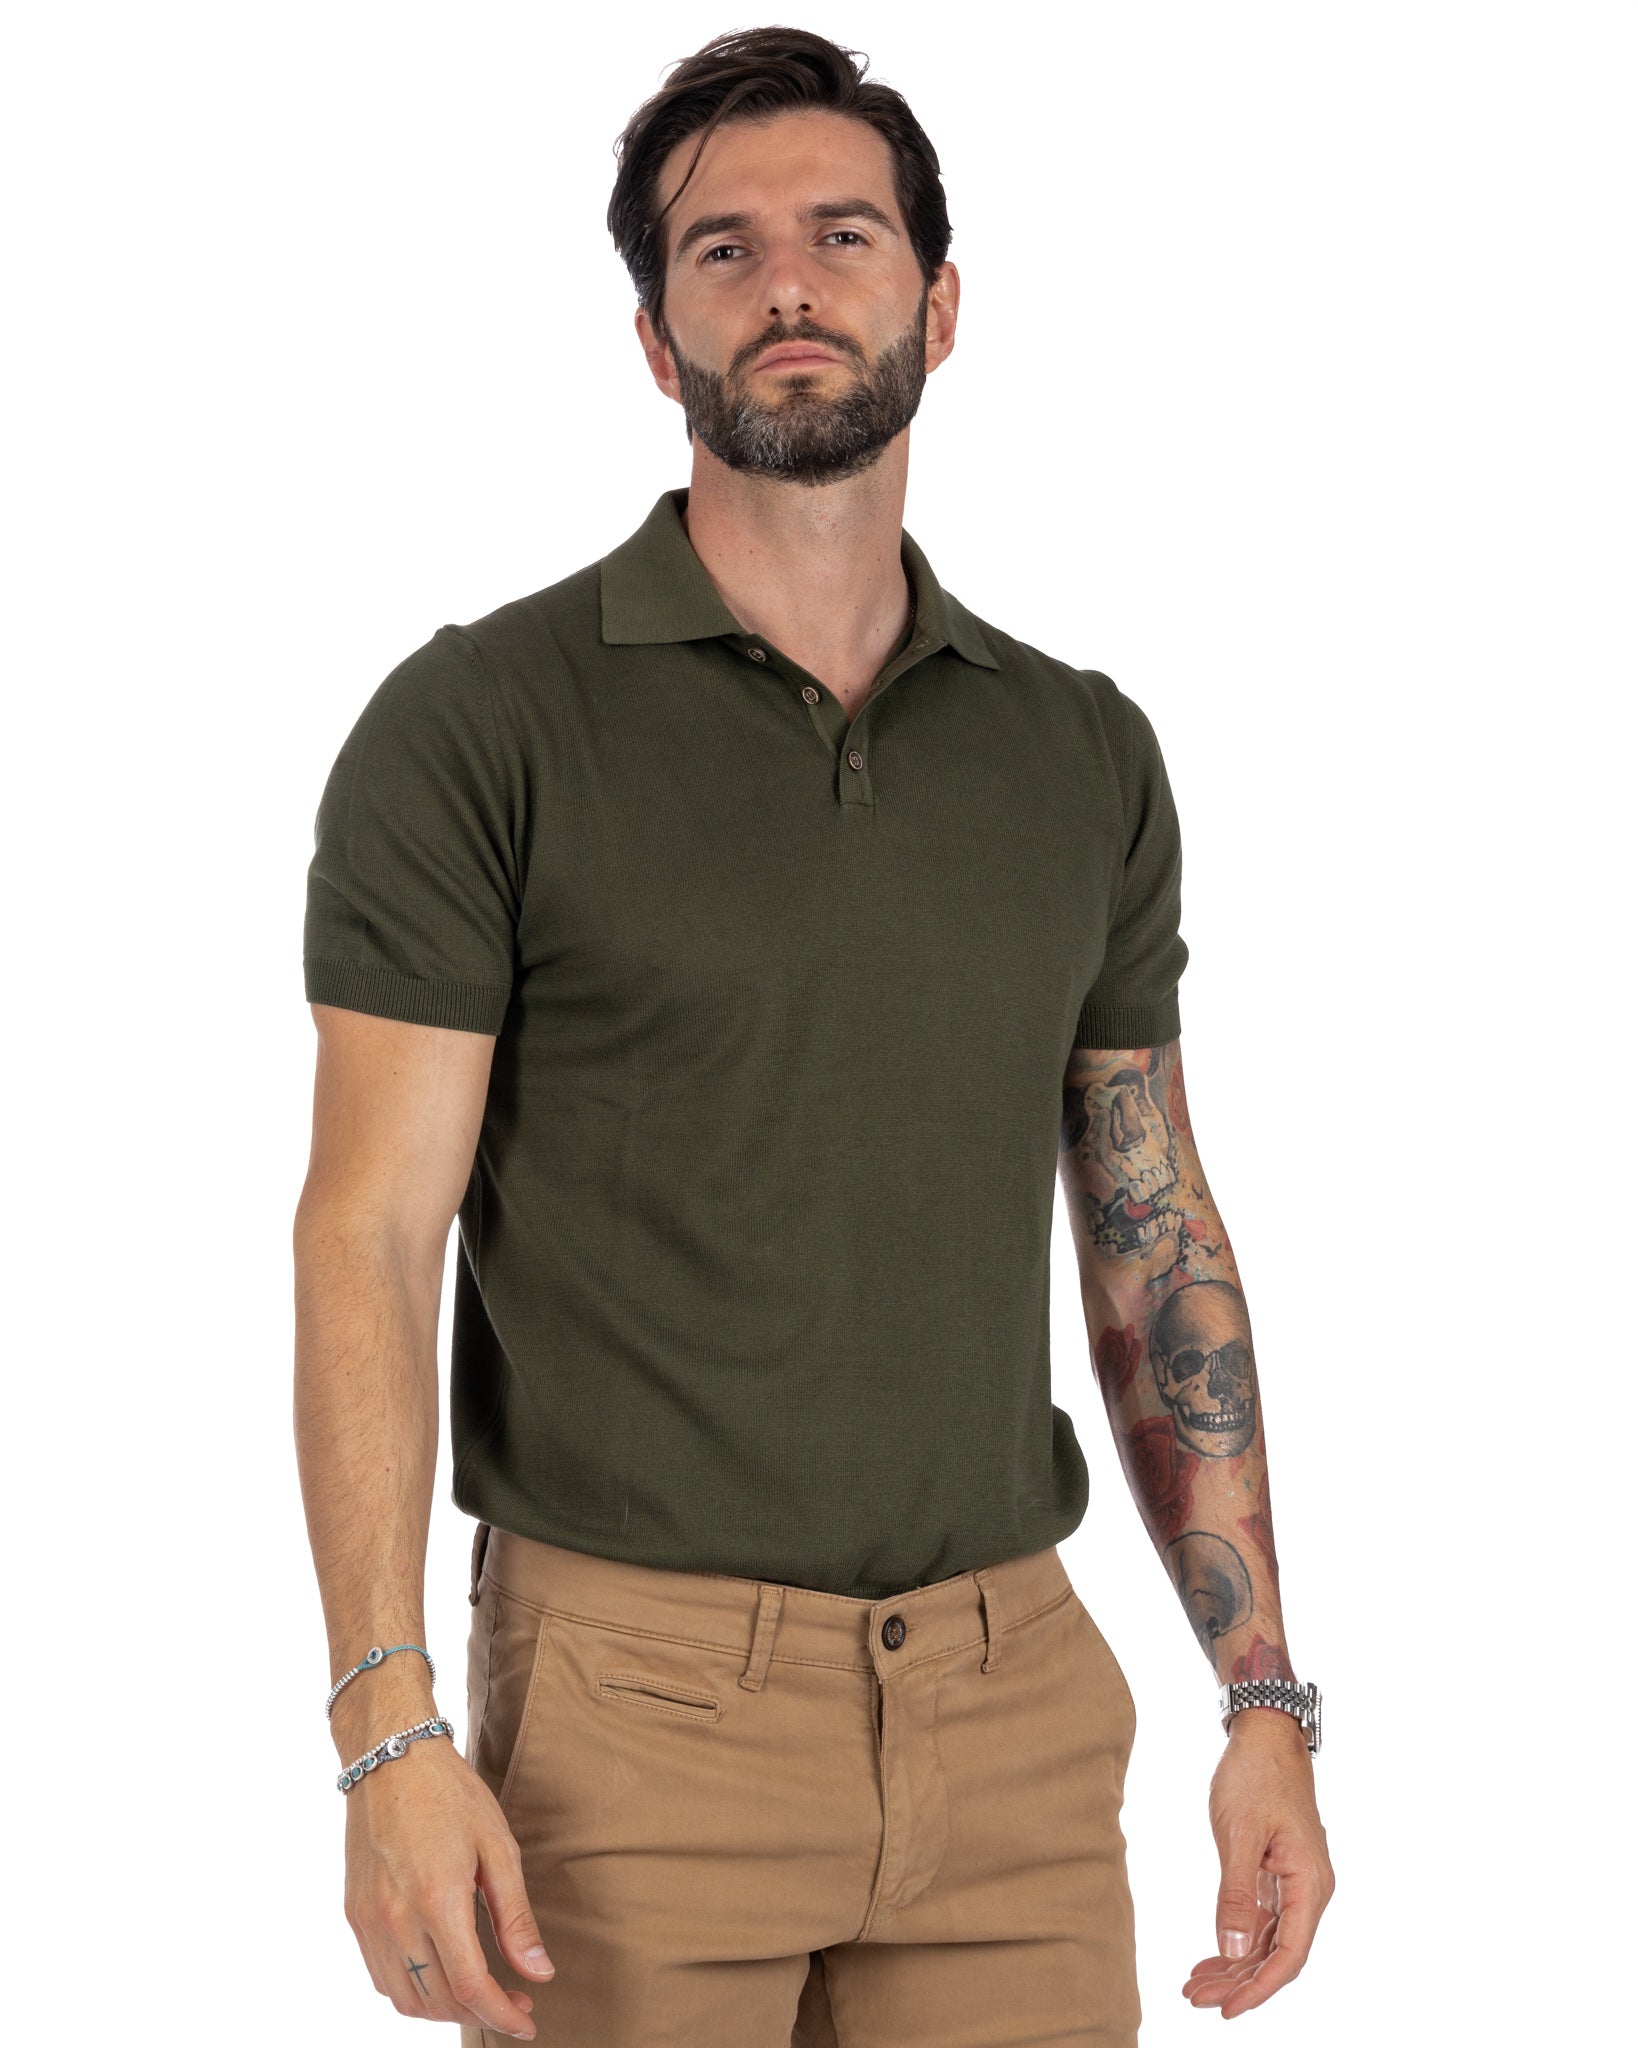 Roger - military knit polo